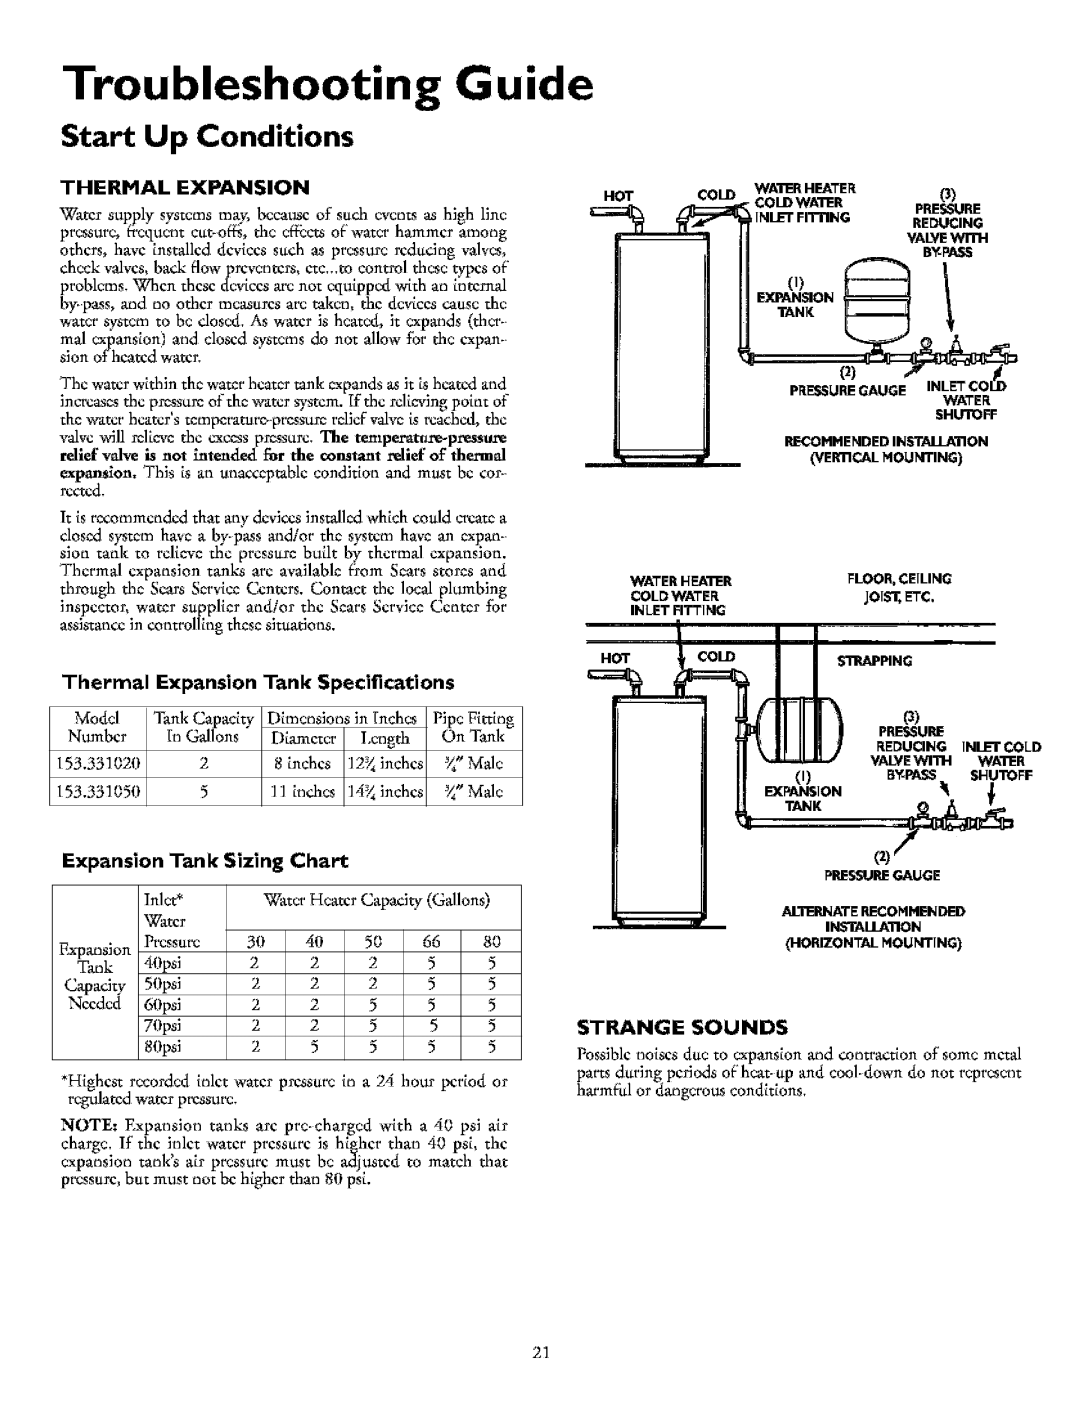 Kenmore 153.321541, 153.321441, 153.32134 Troubleshooting Guide, Start Up Conditions, Thermal Expansion Tank Specifications 